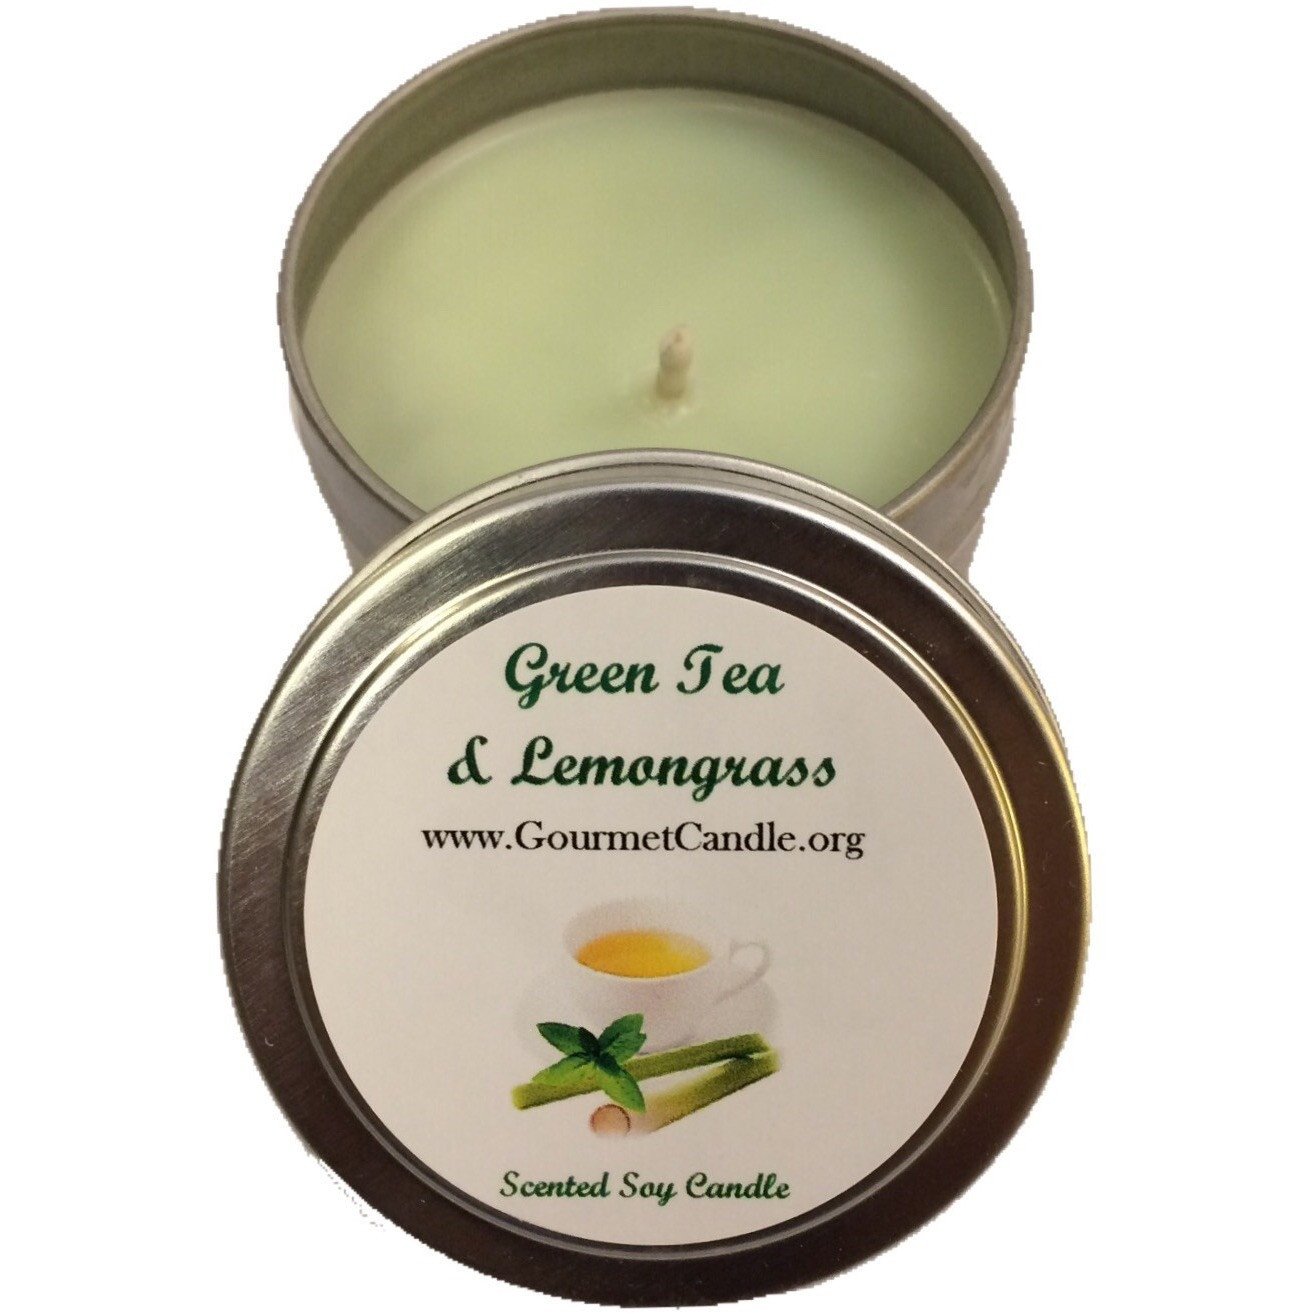 Gifts for Women, Gift Ideas, Unique Gifts Green Tea and Lemongrass Candle - Gourmet Candle